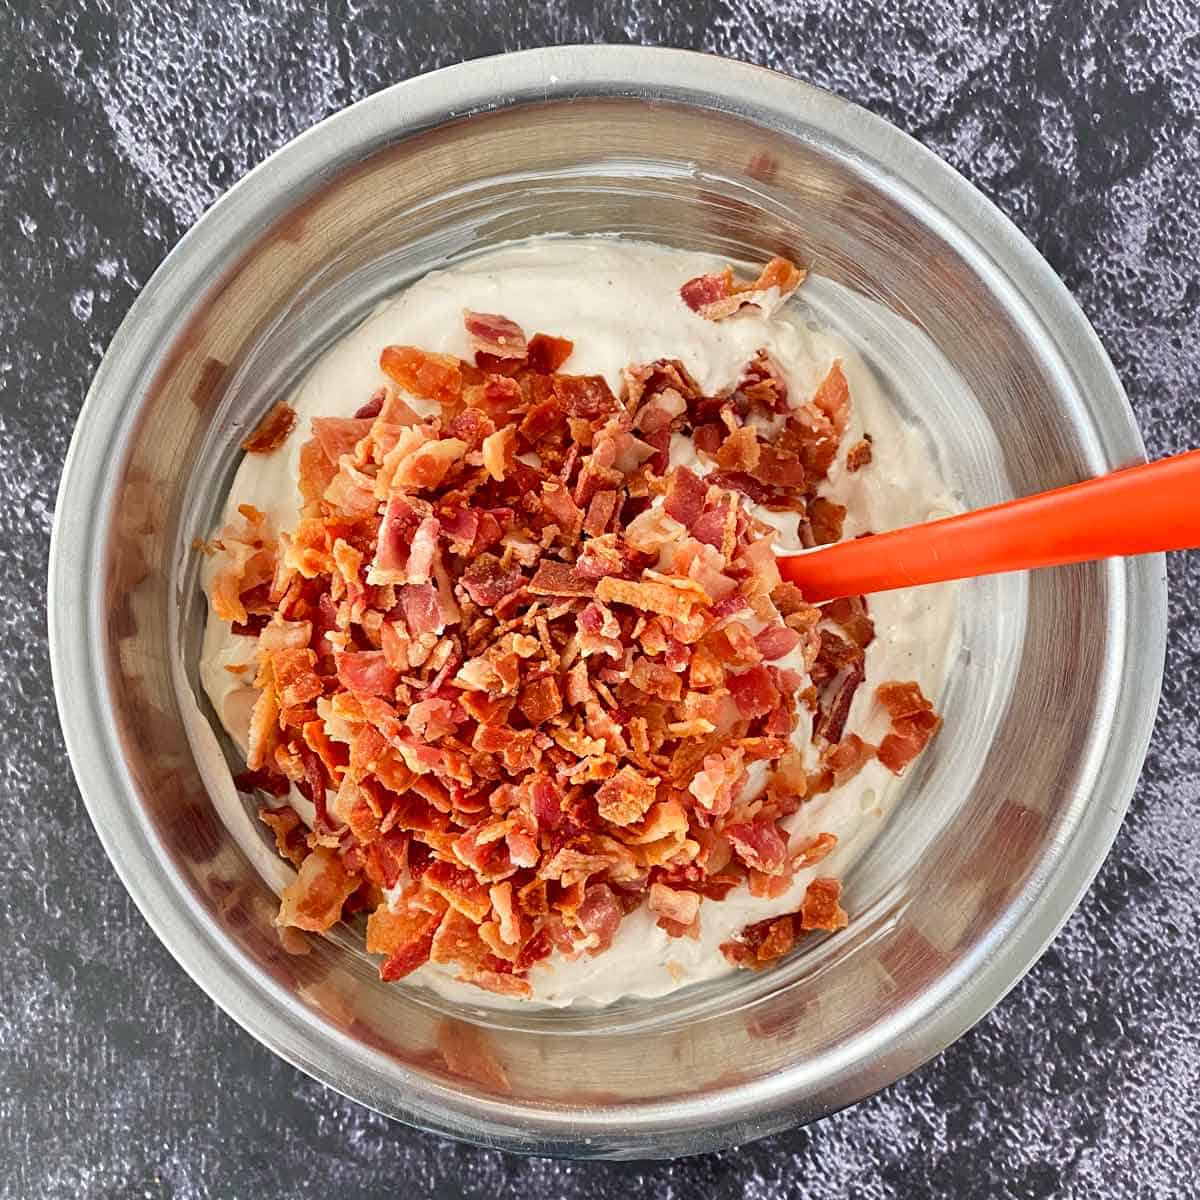 Bacon bits in a stainless steel mixing bowl with dip and a red spatula.